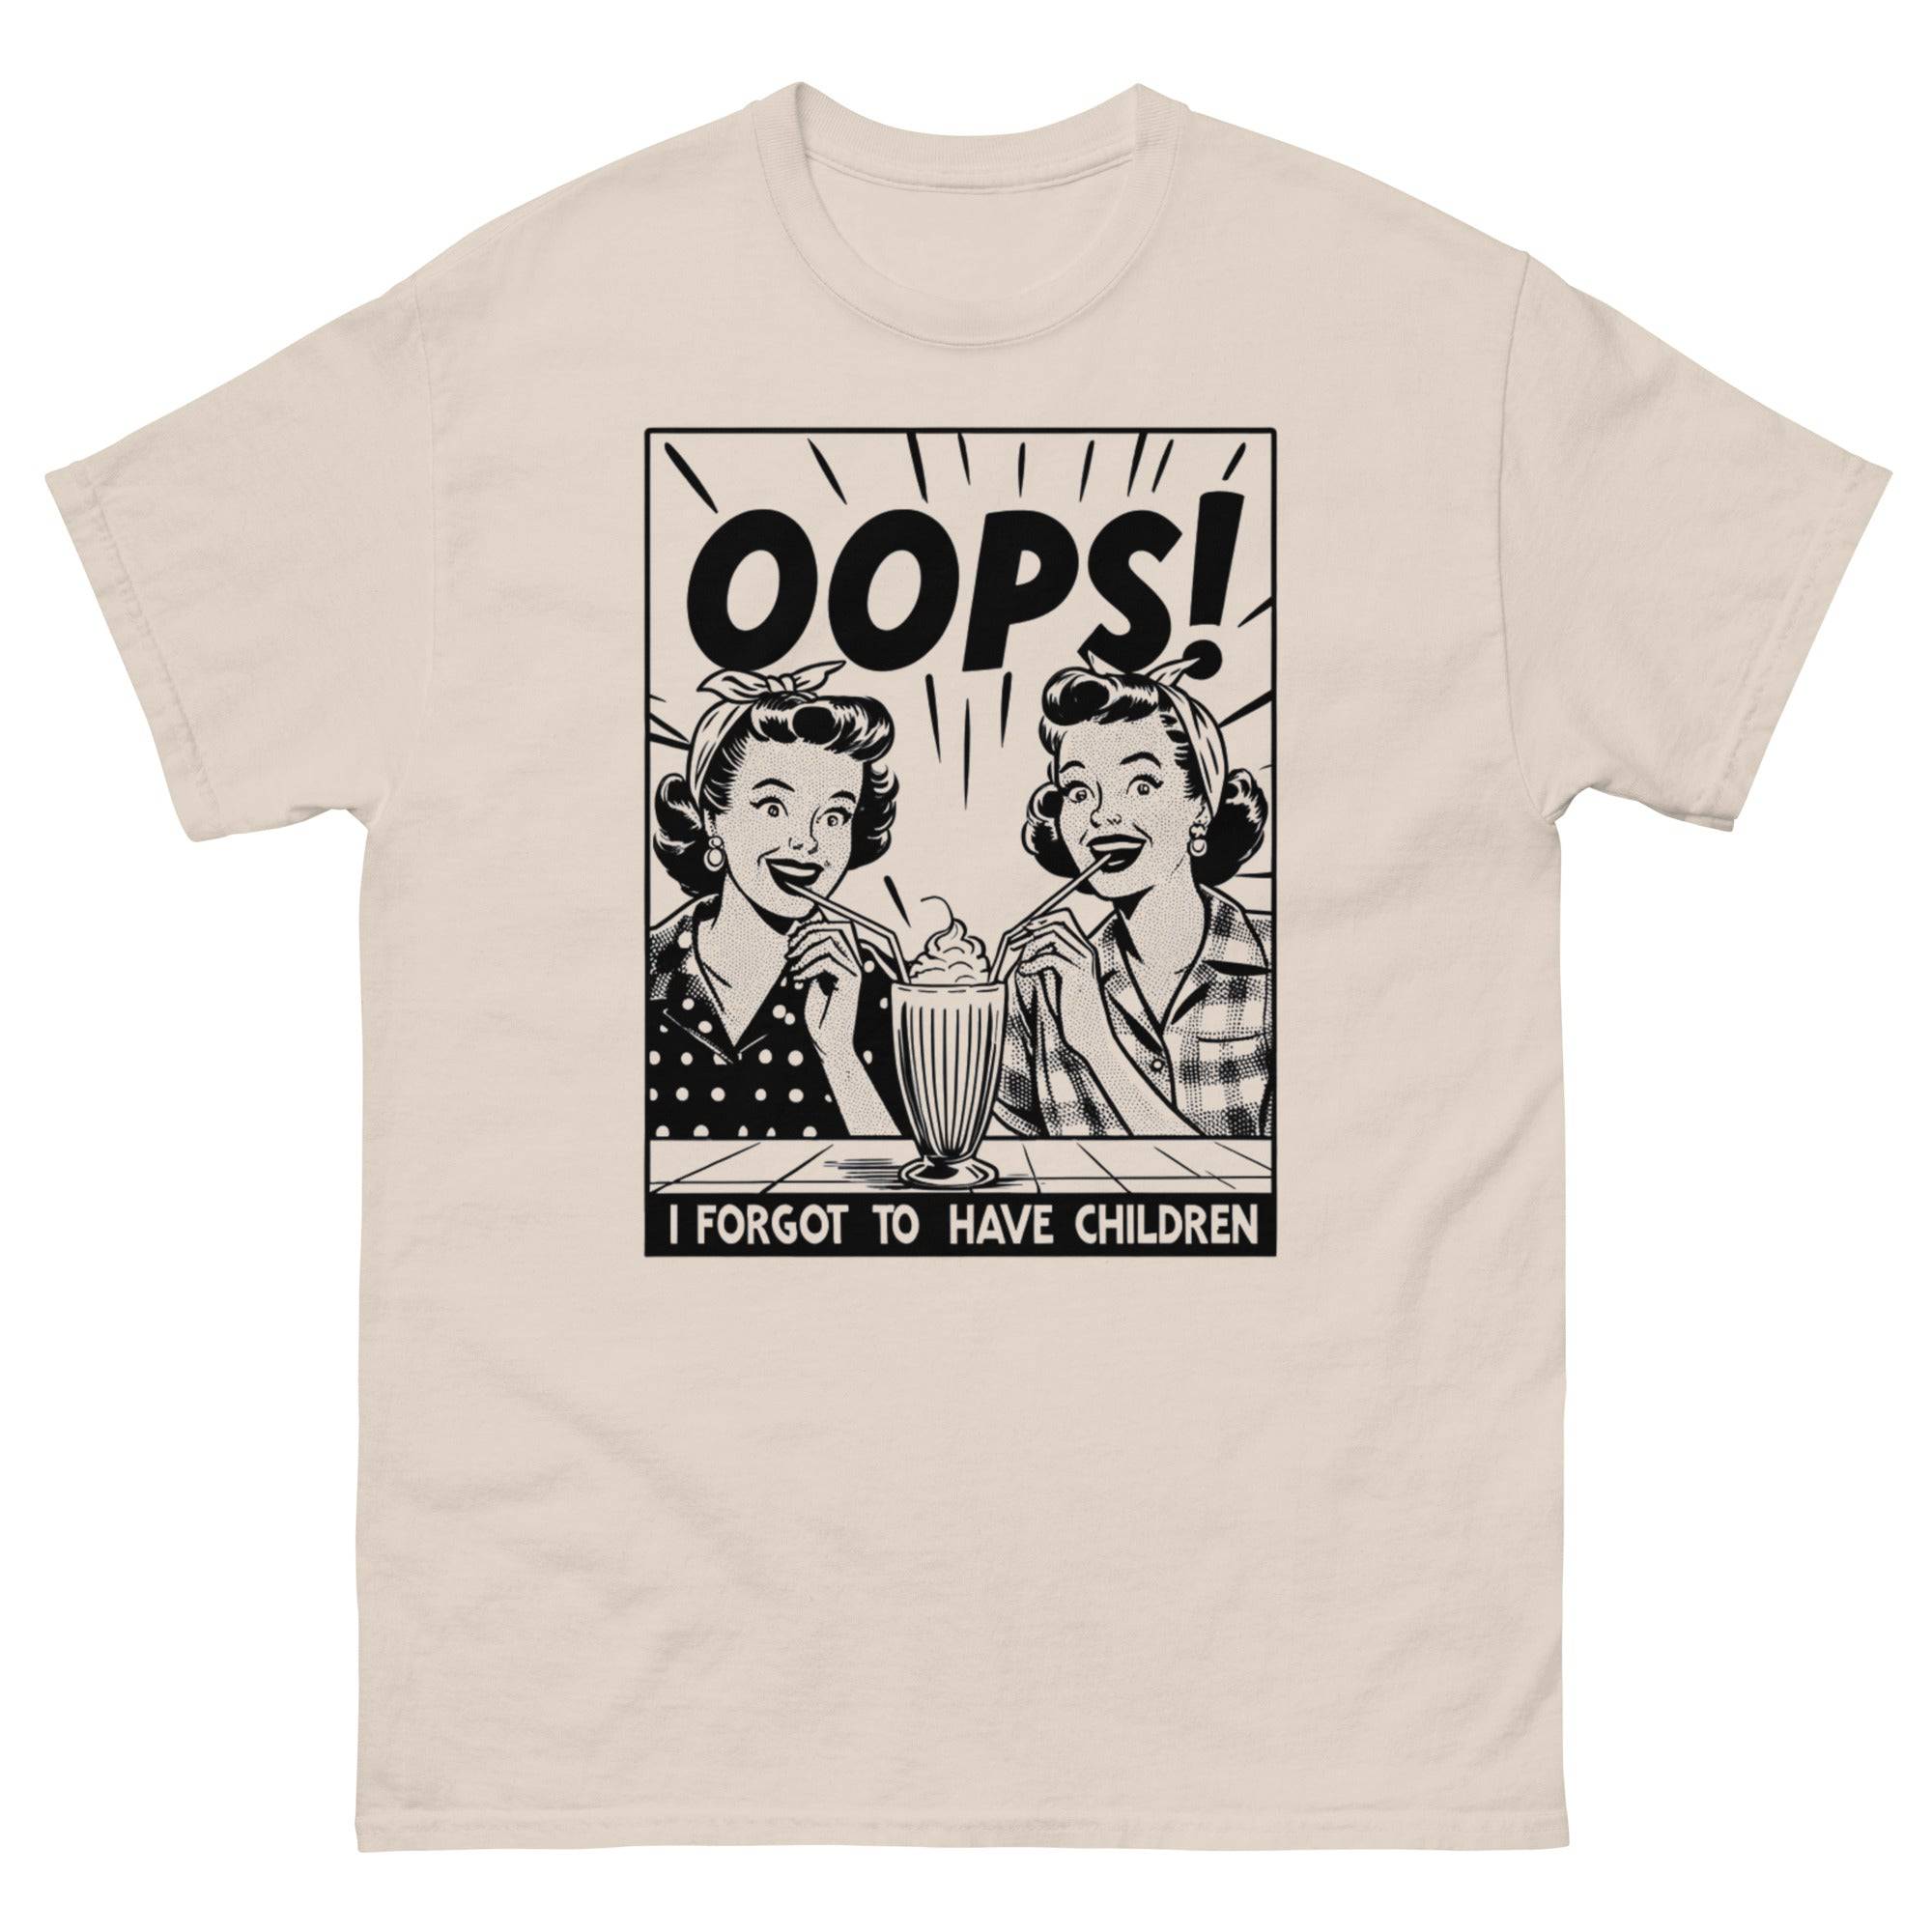 Oops, I forgot to have Children classic tee - Rose Gold Co. Shop